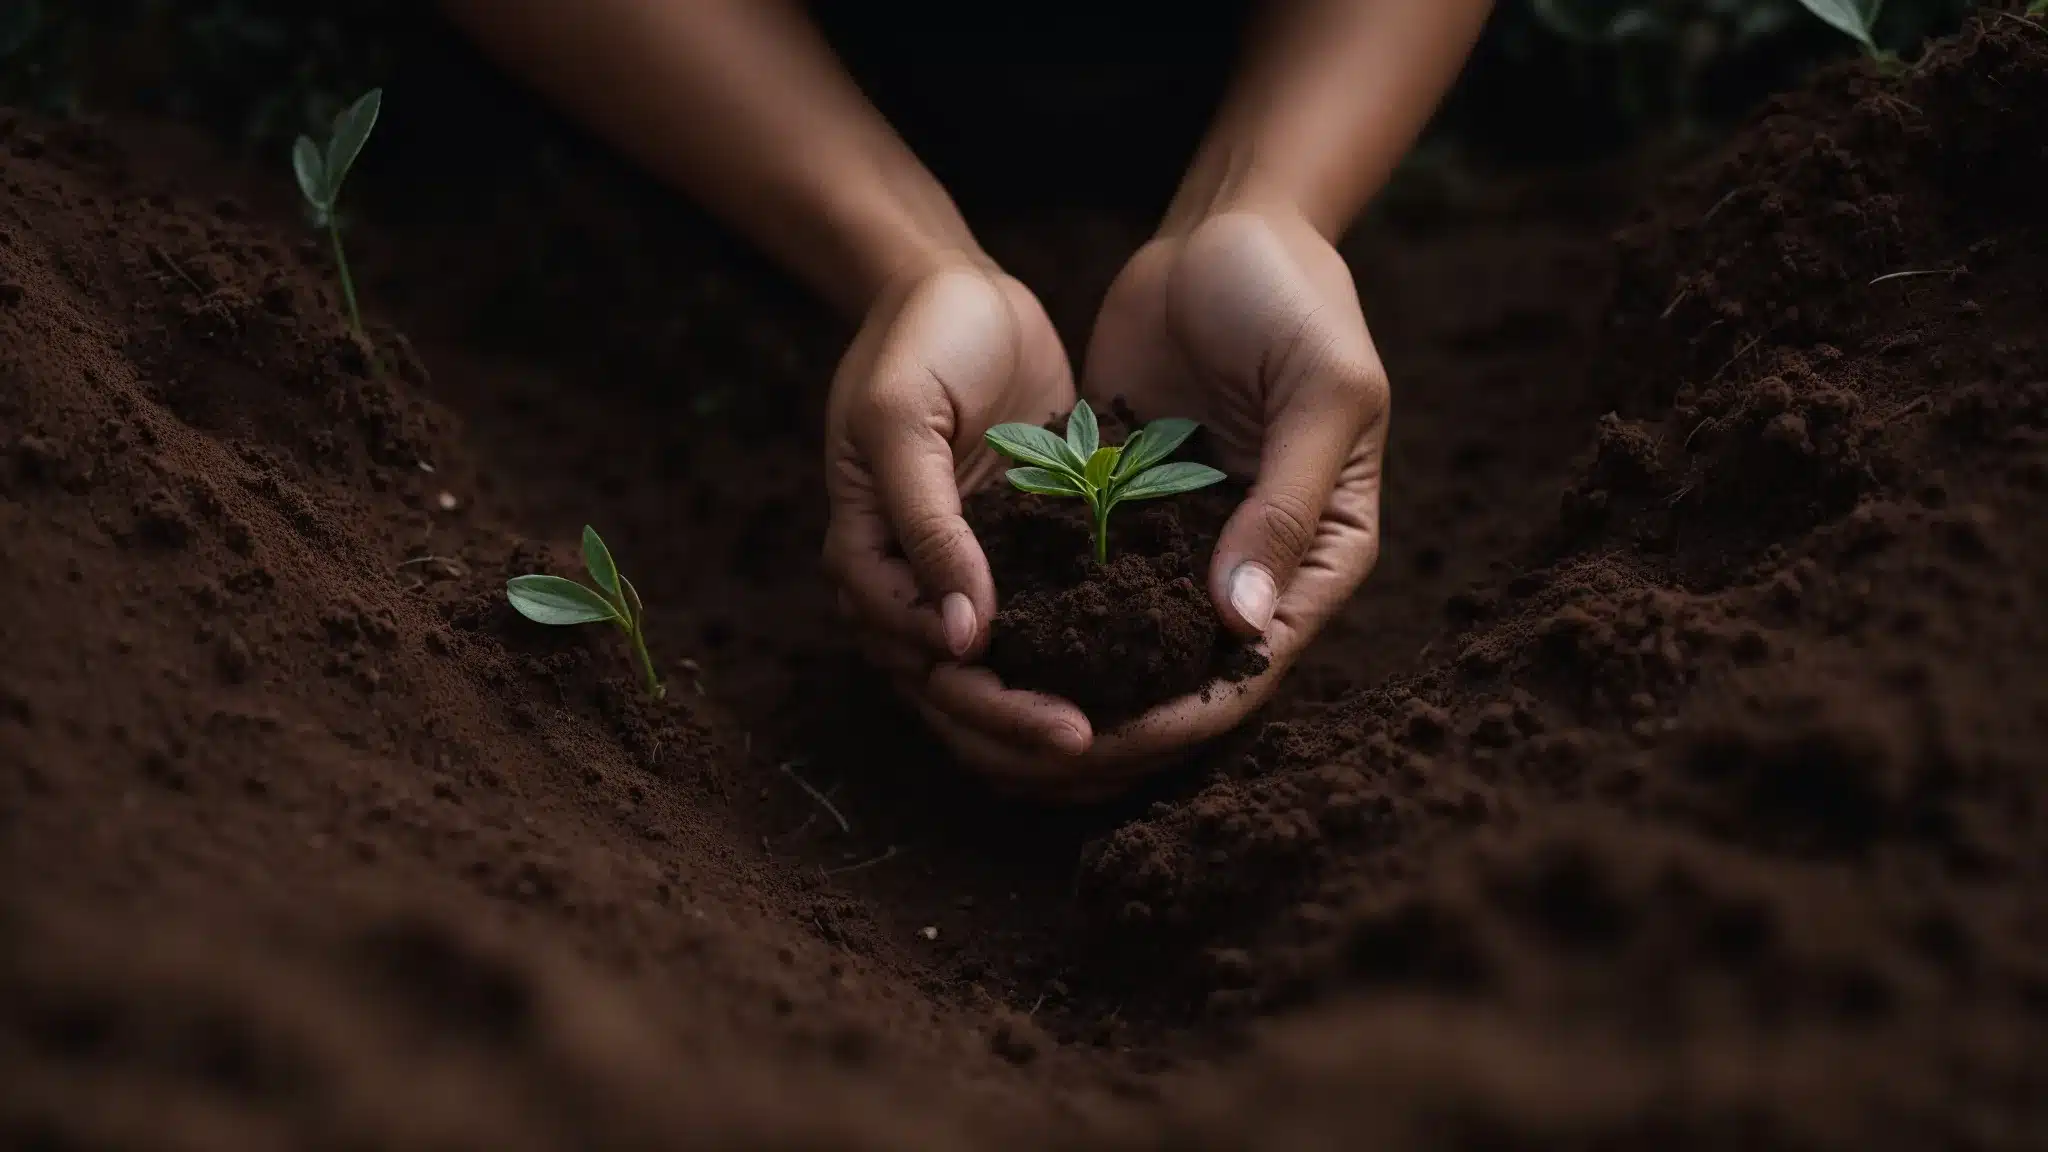 a person is softly cradling a small plant sprouting from rich soil, symbolizing nurturing growth and recovery.